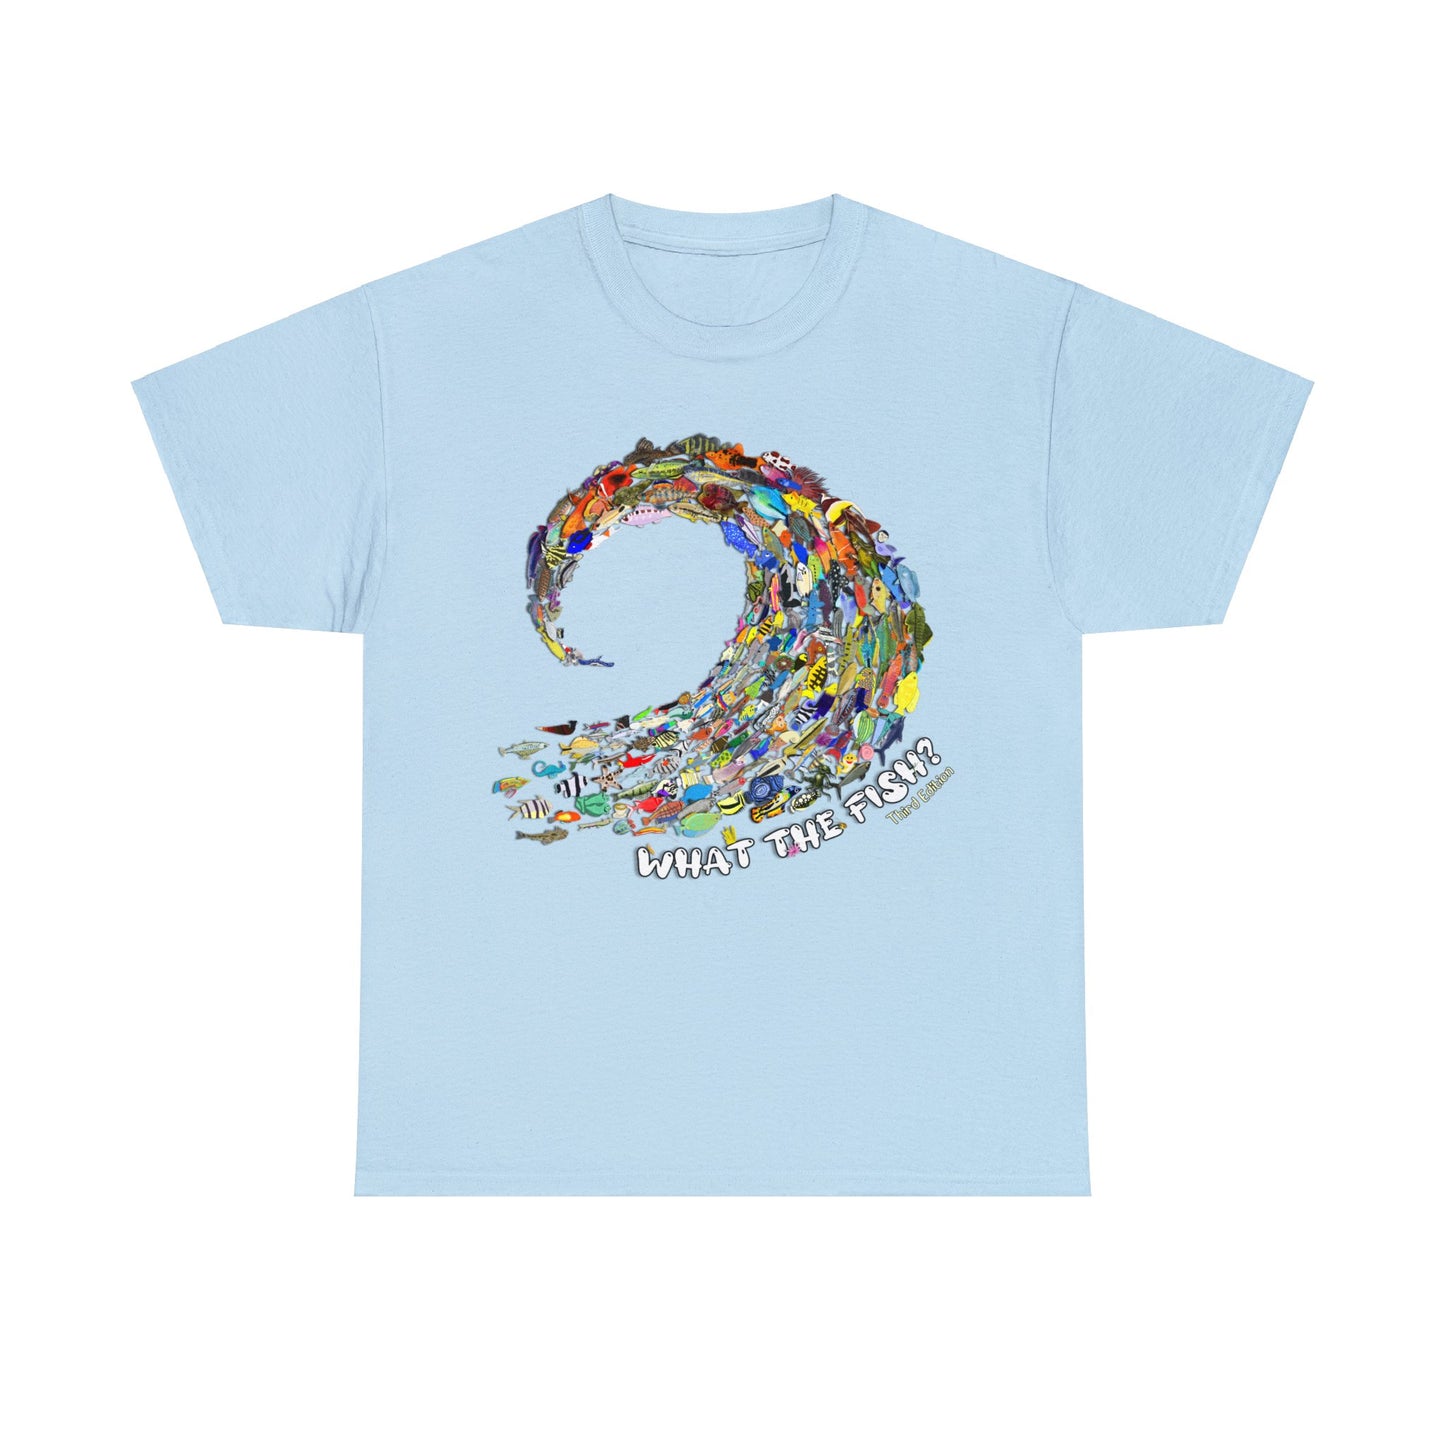 01. T-Shirt - 2024 What the Fish (Third Edition) Wave Design